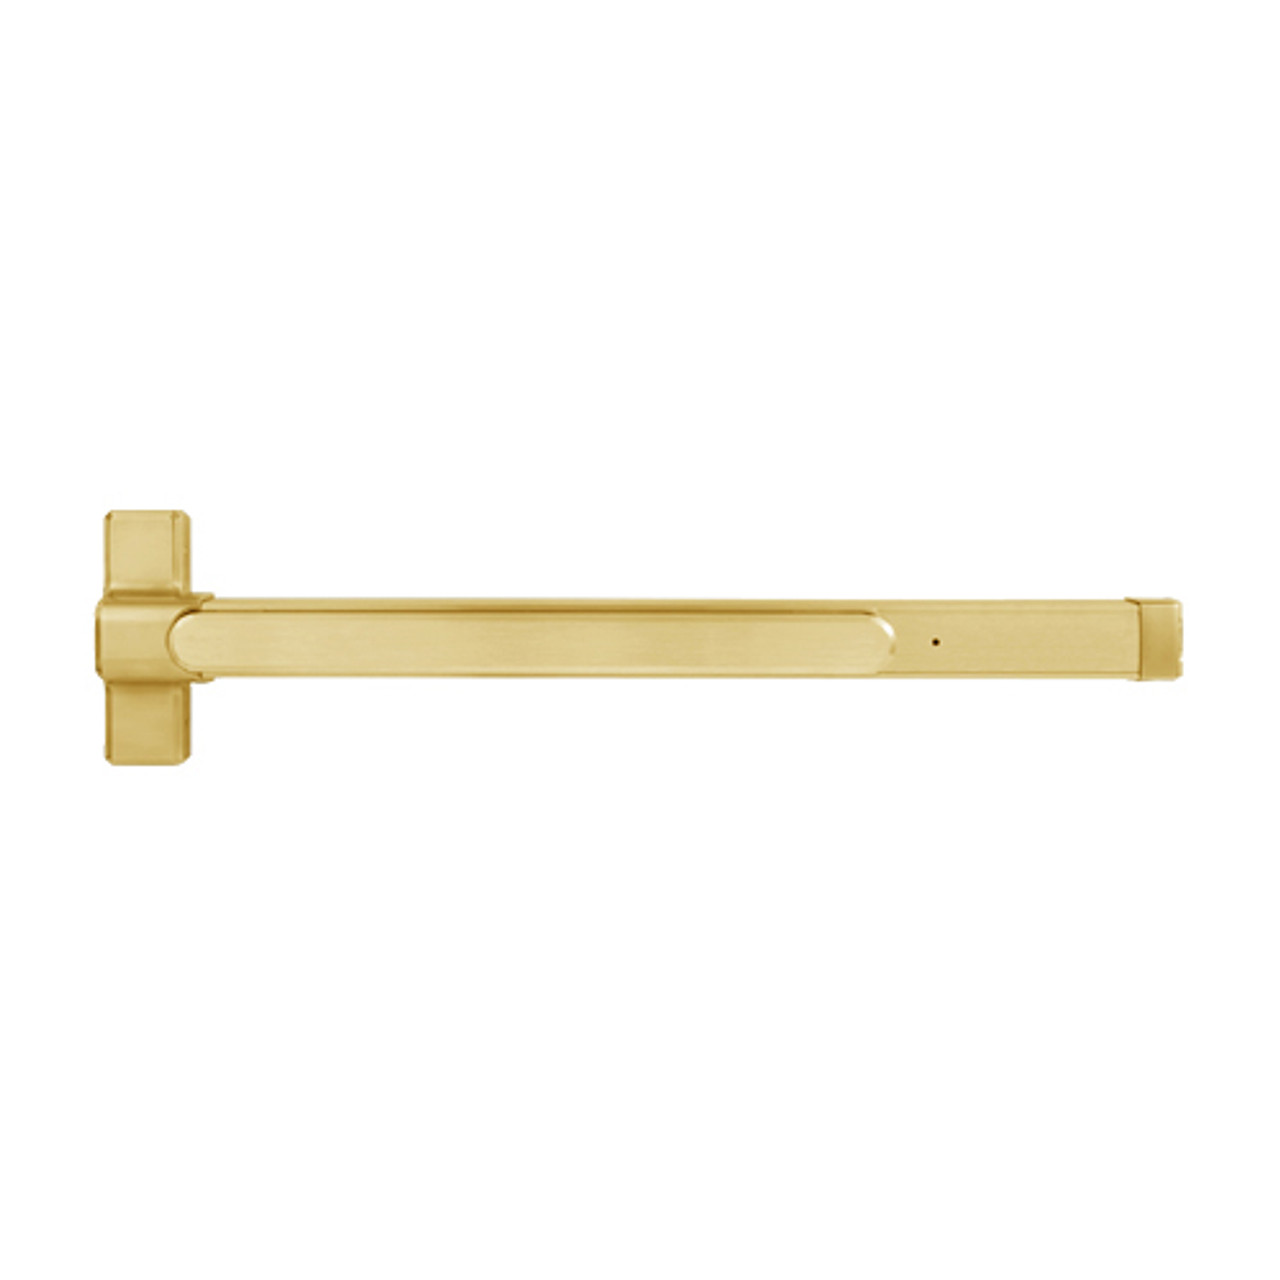 QED117X-36-7-605 Stanley QED100 Series Heavy Duty Surface Vertical Rod Hex Dog Exit Device in Bright Brass Finish